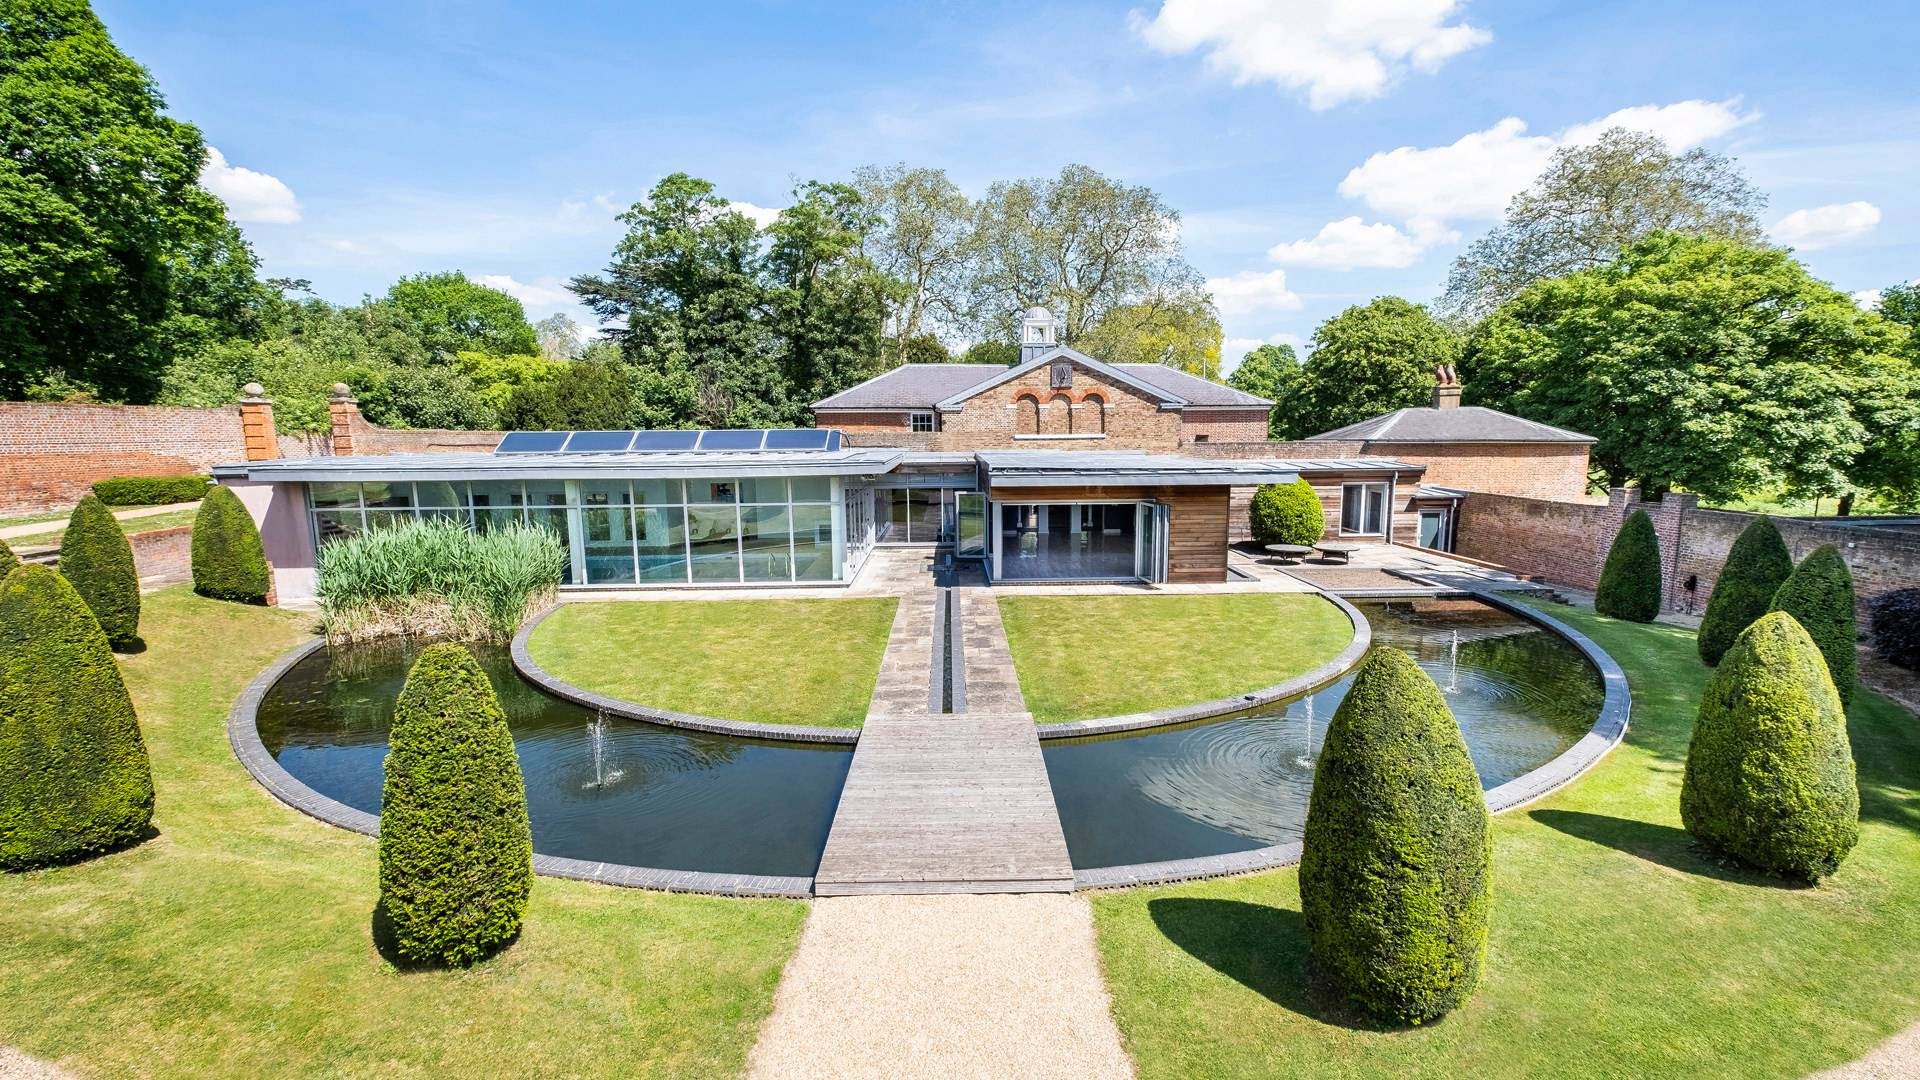 UNIQUE MODERN DISTINCTIVE GRADE II LISTED ECO MANSION WITH EXCEPTIONAL AND VERSATILE ACCOMMODATION AND A SEPARATE COTTAGE ALL SET WITHIN IMPRESSIVE WALLED LANDSCAPED GARDENS